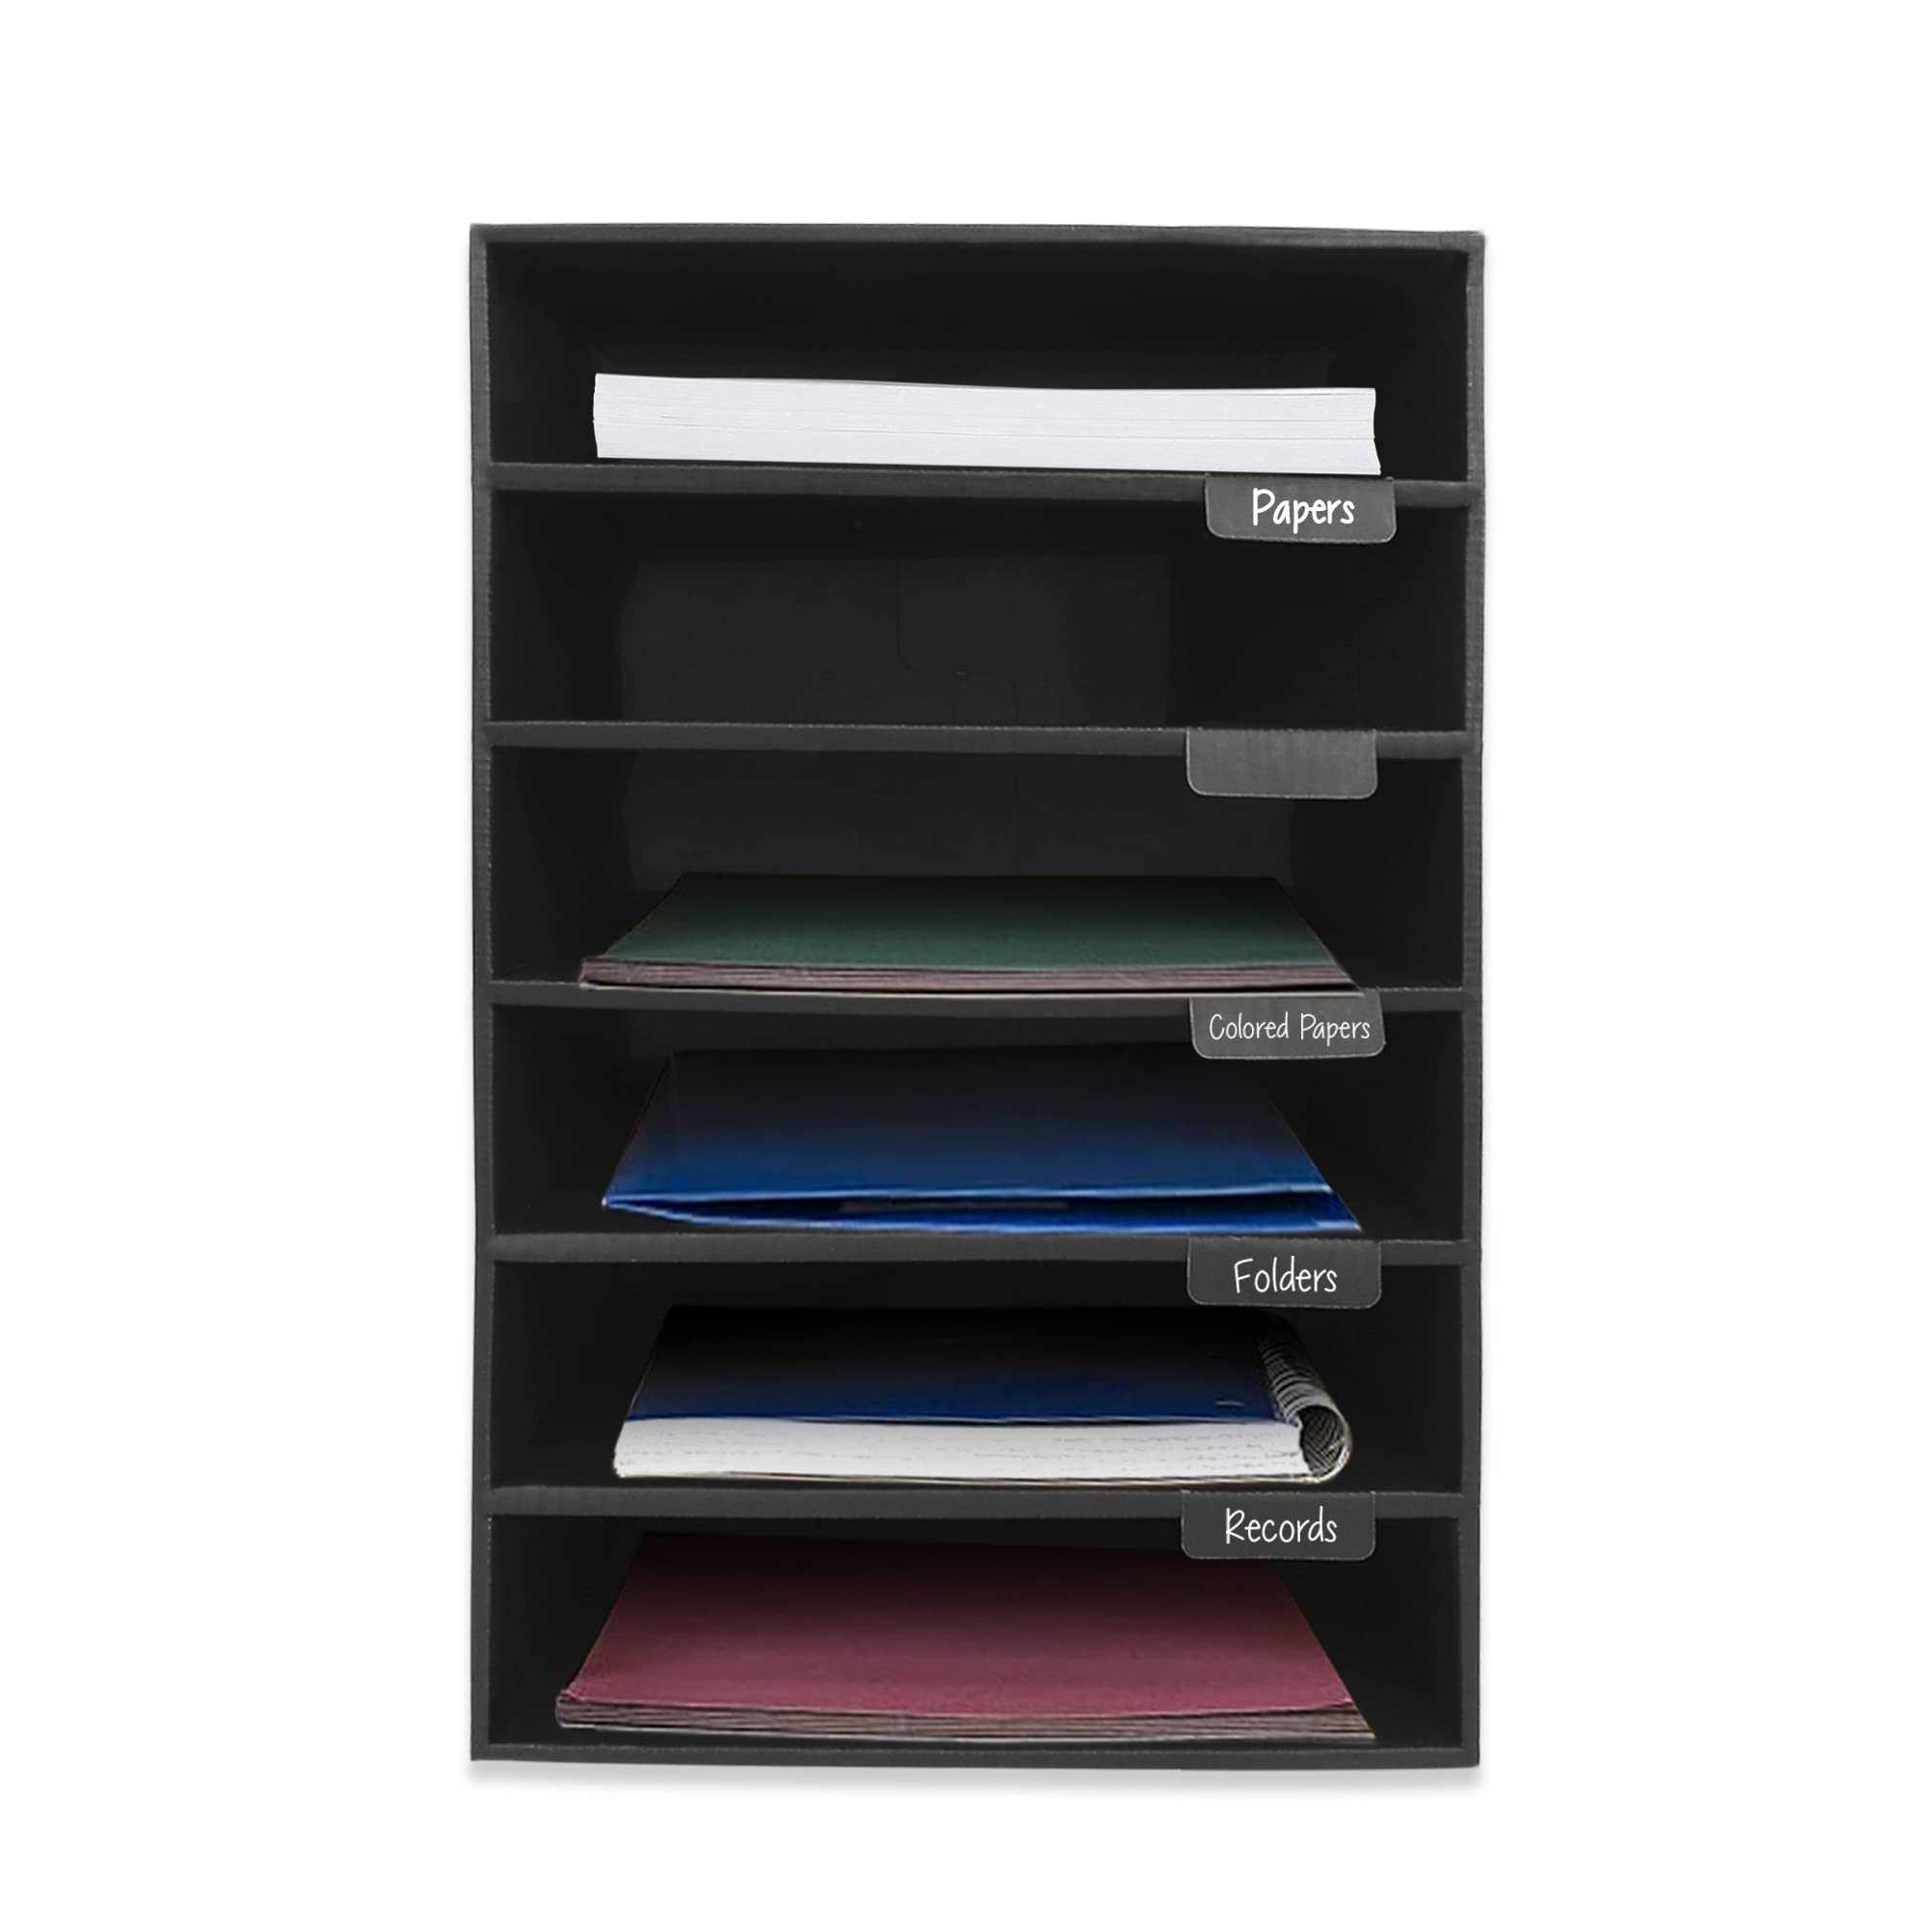 AdirOffice Paper Storage Organizer 6 Slot Cardboard Construction Paper Shelf Organizer for Home, School, Classroom, or Office Multifunctional Storage for Documents, Mails, Books, Files, and More  - Like New